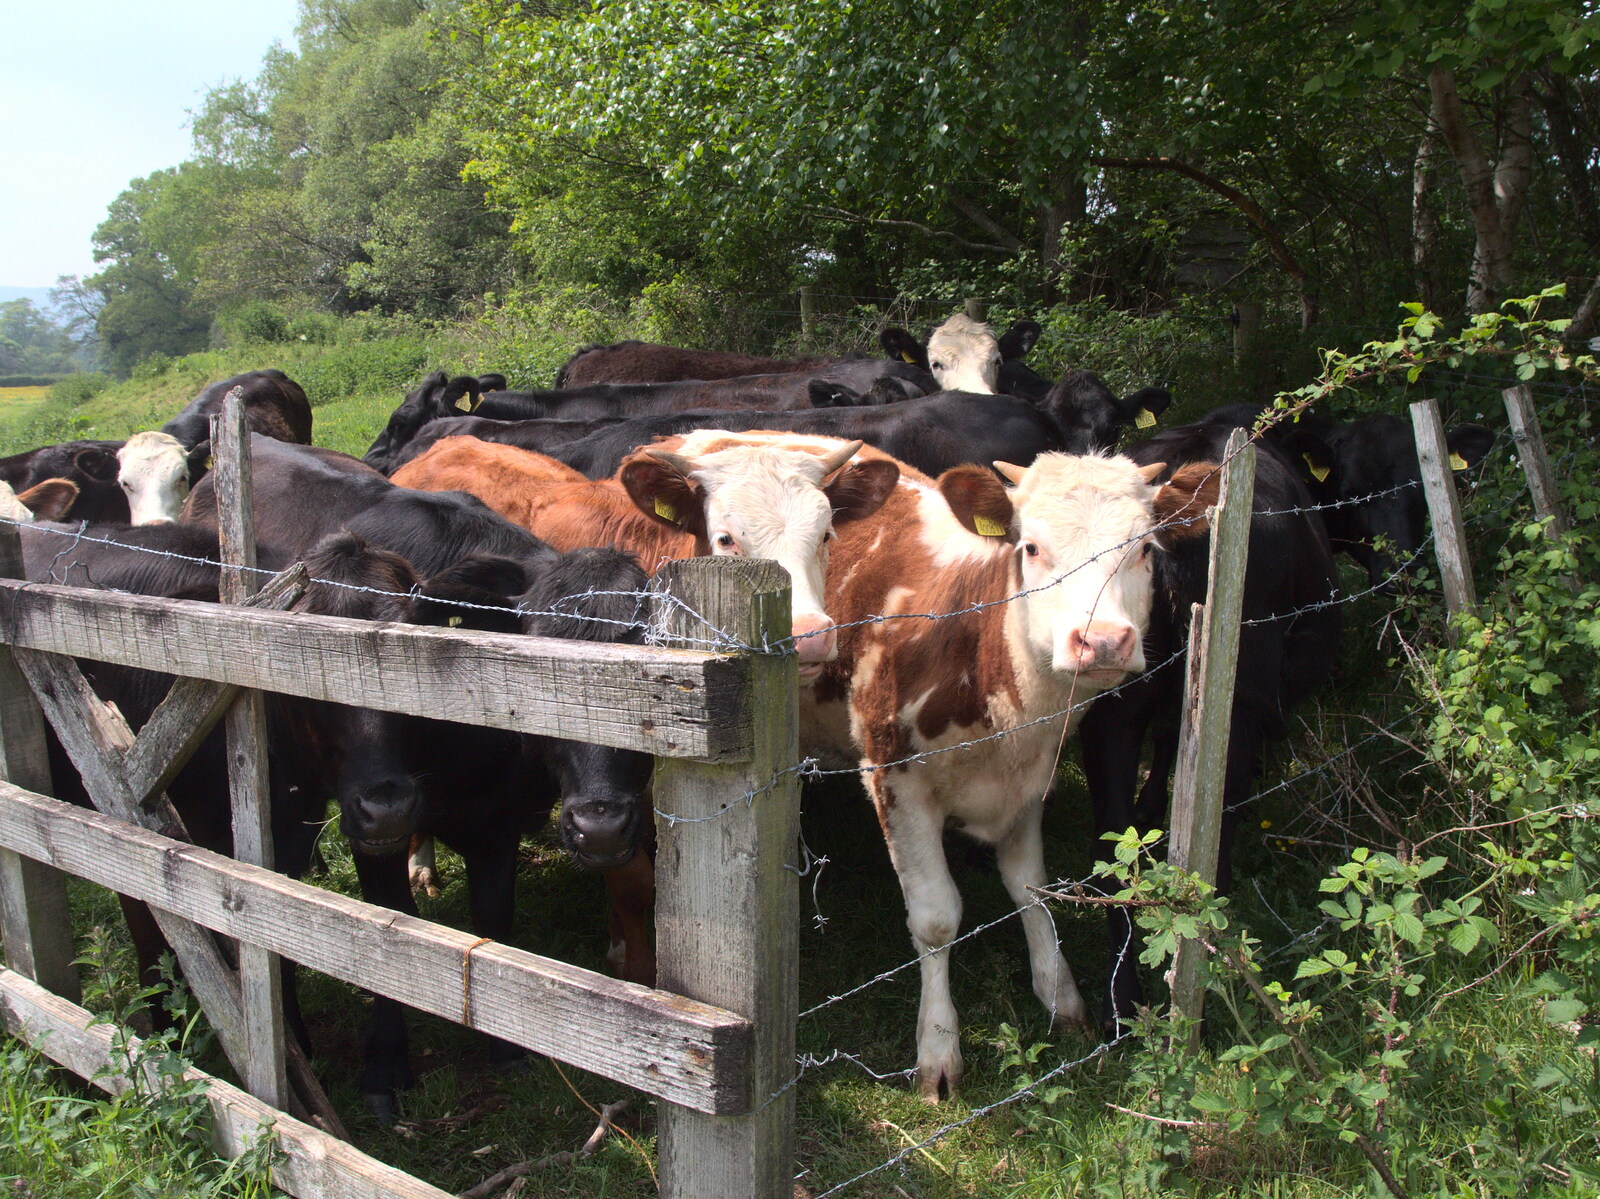 Some curious calves peer over a fence from The Grand Re-opening of the Chagford Lido, Chagford, Devon - 28th May 2016